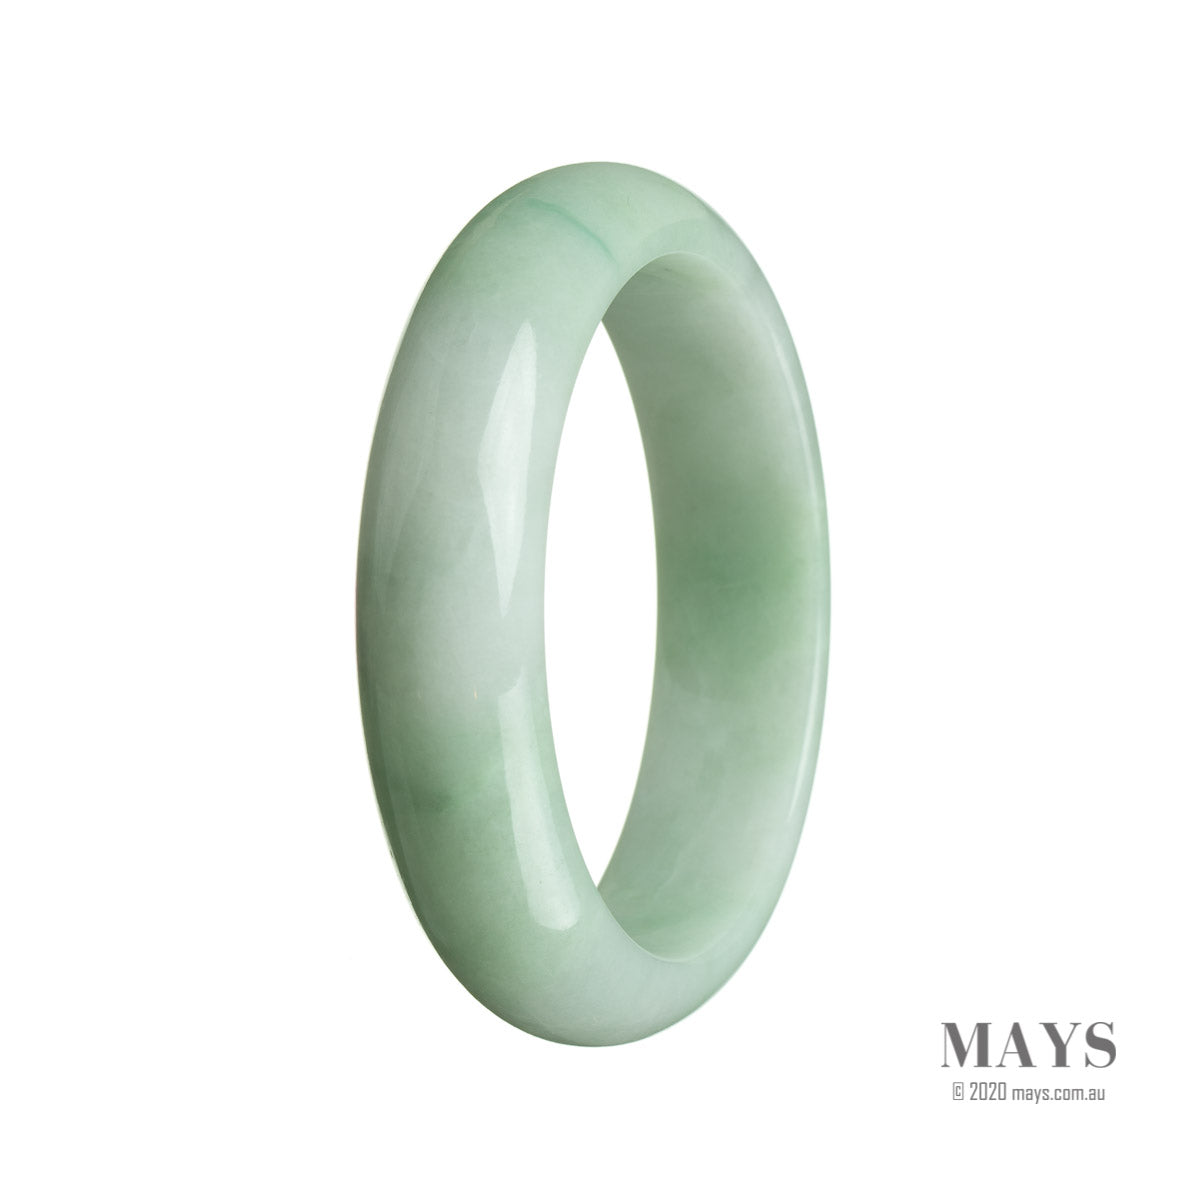 A close-up image of a light green Burma Jade bracelet with a half moon shape, measuring 57mm in size. The bracelet is made from high-quality Grade A jade and is adorned with intricate patterns.